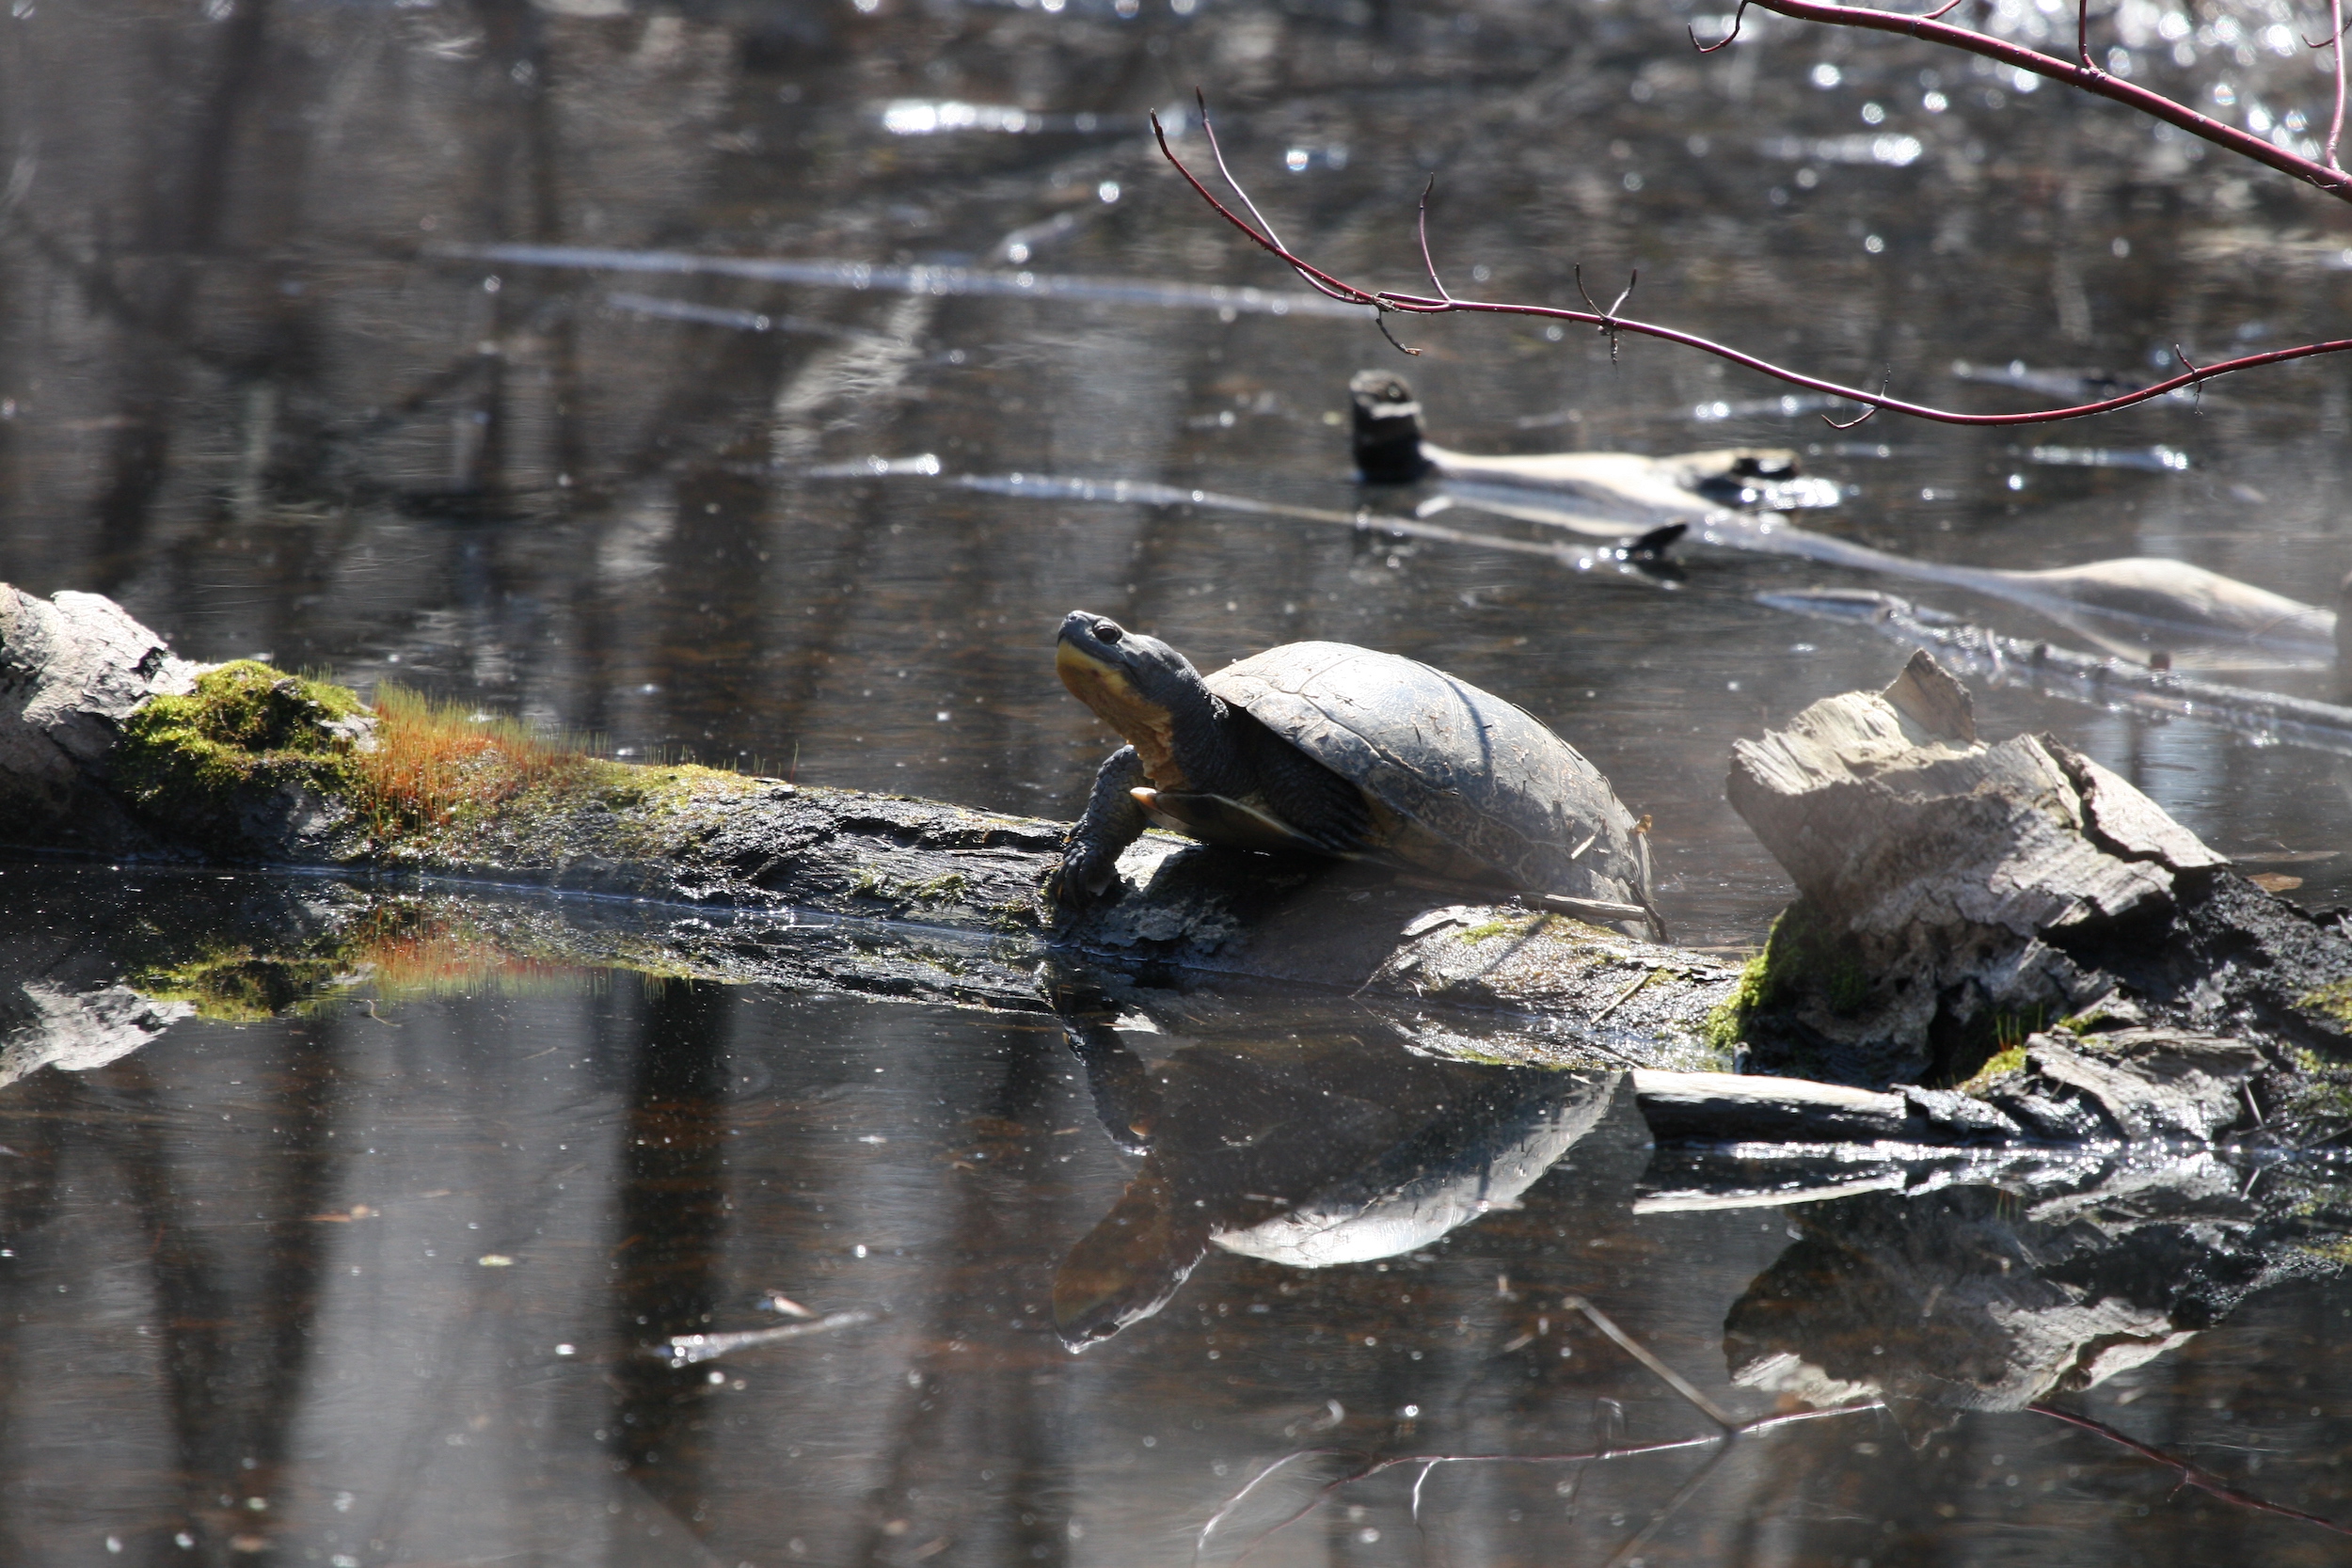 The fund administered by Species Conservation Action Agency collects money from industry wanting to do work that harms the habitats of six species at risk, including the Blanding's Turtle